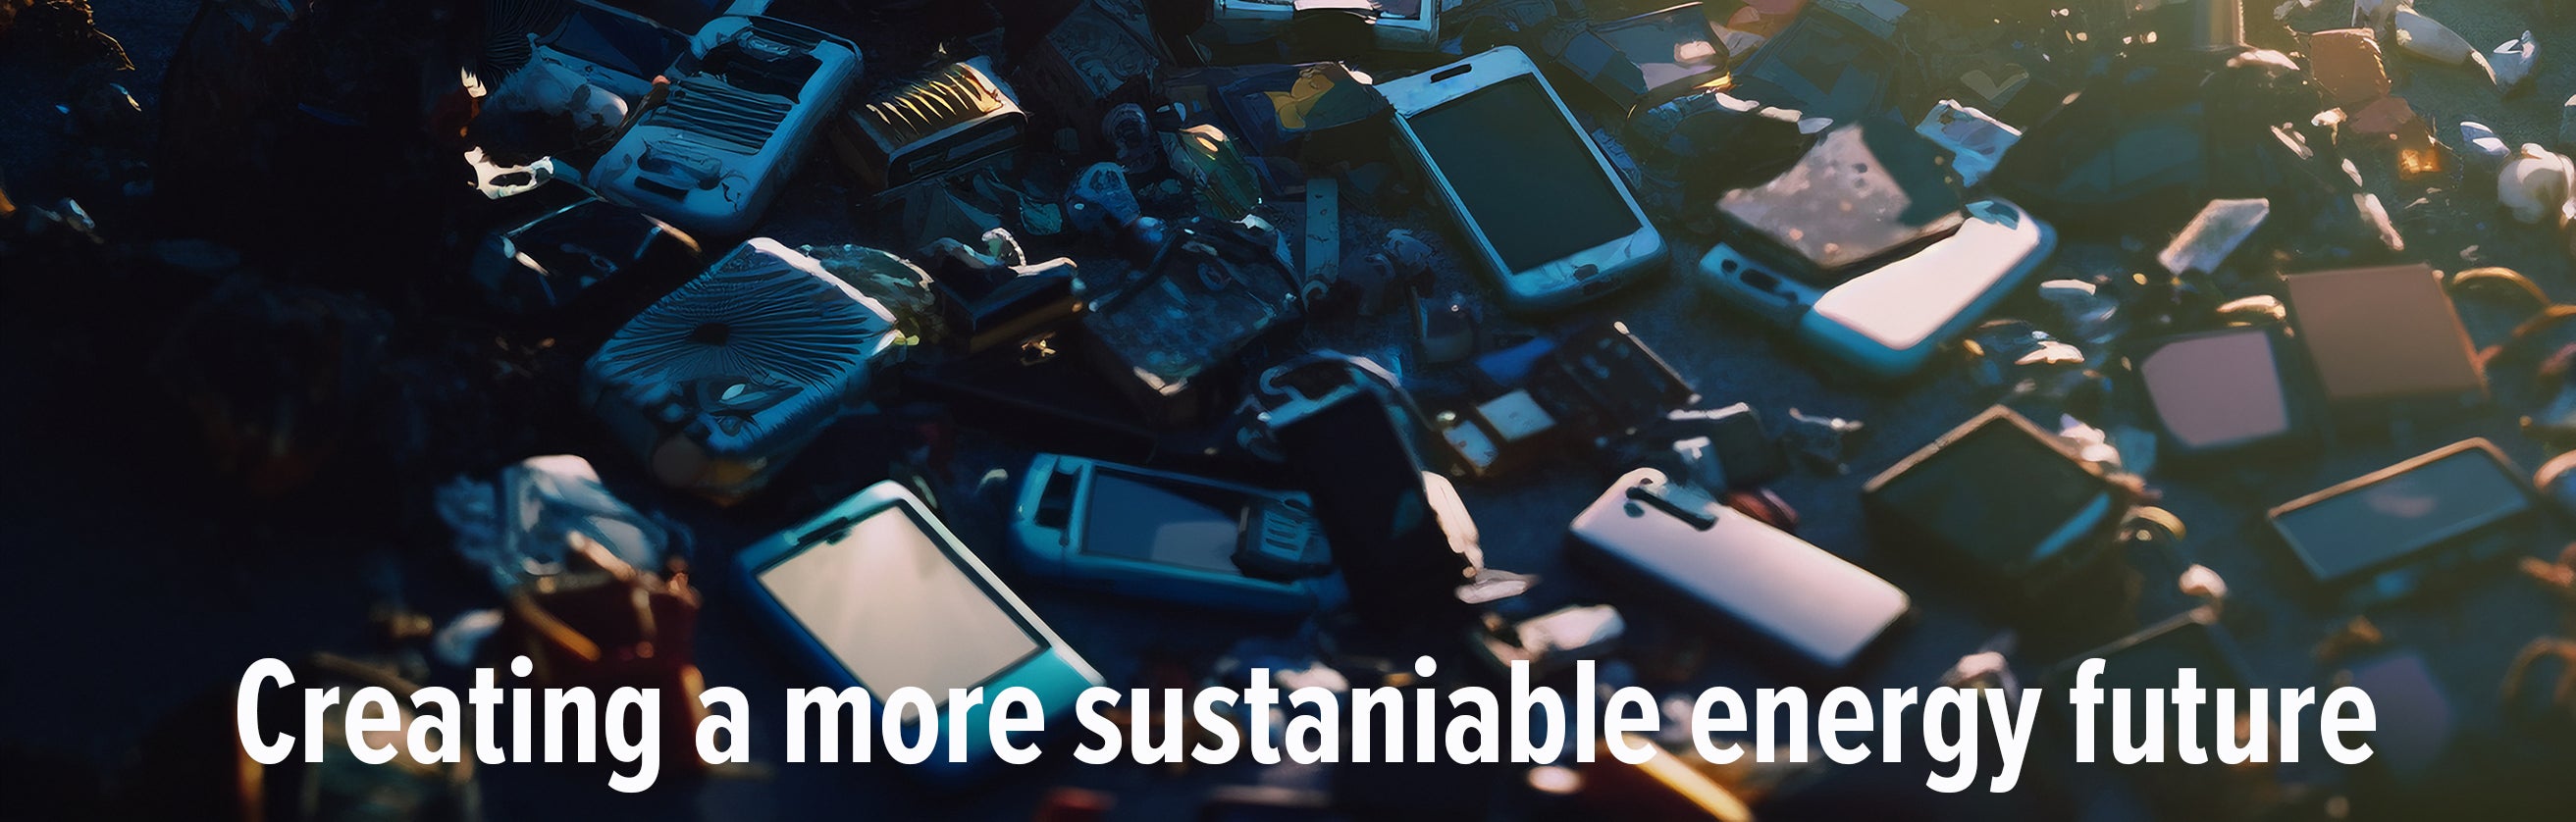 pile of used cell phones and e-waste